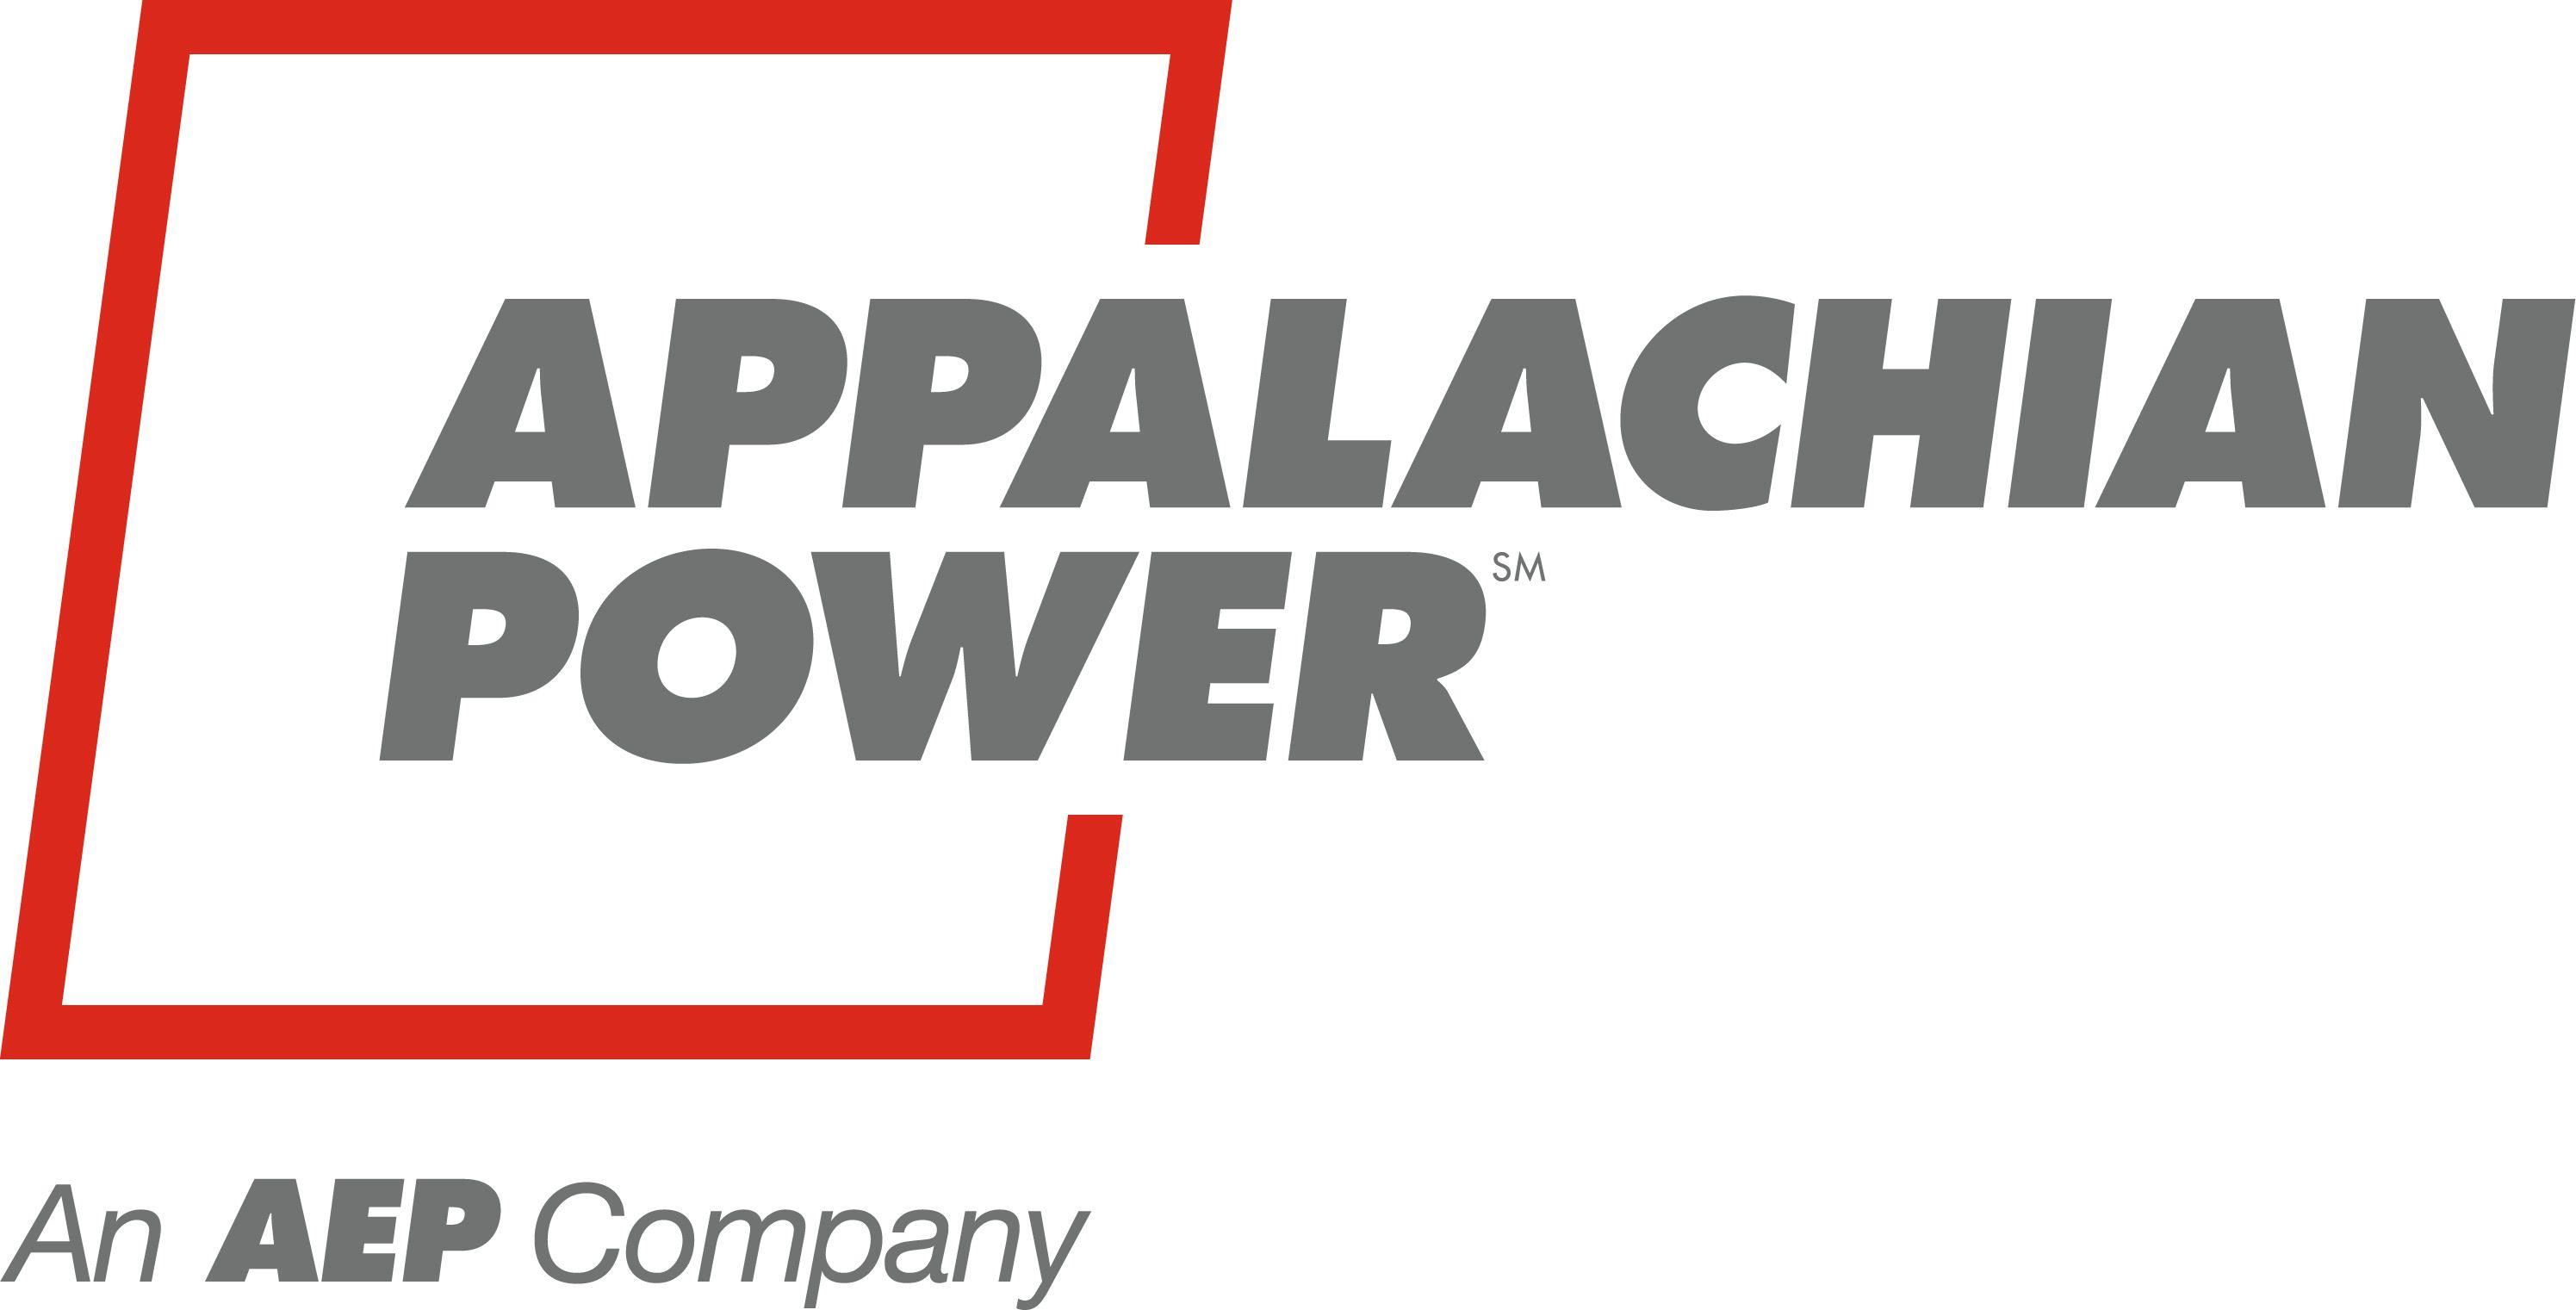 American Electrical Power Company Logo - Sons and daughters of Appalachian Power employees net Educational